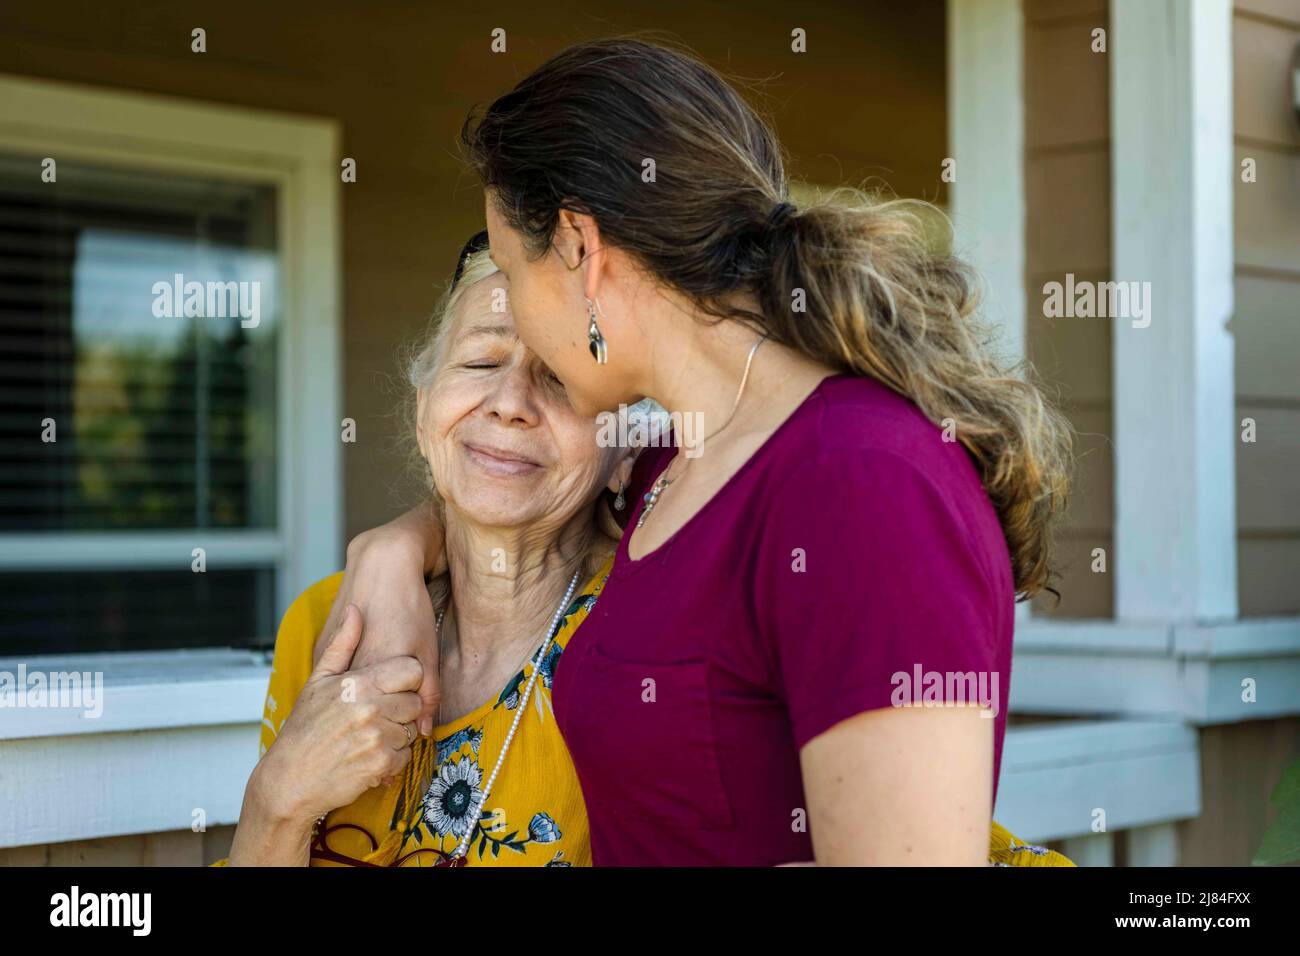 Travis Air Force Base, California, USA. 30th Apr, 2022. U.S. Air Force Capt. Zlatoslava Karga, right, 60th Operational Medical Readiness Squadron mental health psychiatrist, embraces her mother, Luba, at their home in Vacaville, California, April 30, 2022. Karga was raised in Kyiv, immigrated to the U.S. in 2001 and commissioned into the Air Force in 2019. When the war broke out in Ukraine, she and her husband evacuated her mother to the U.S. Credit: U.S. Air Force/ZUMA Press Wire Service/ZUMAPRESS.com/Alamy Live News Stock Photo